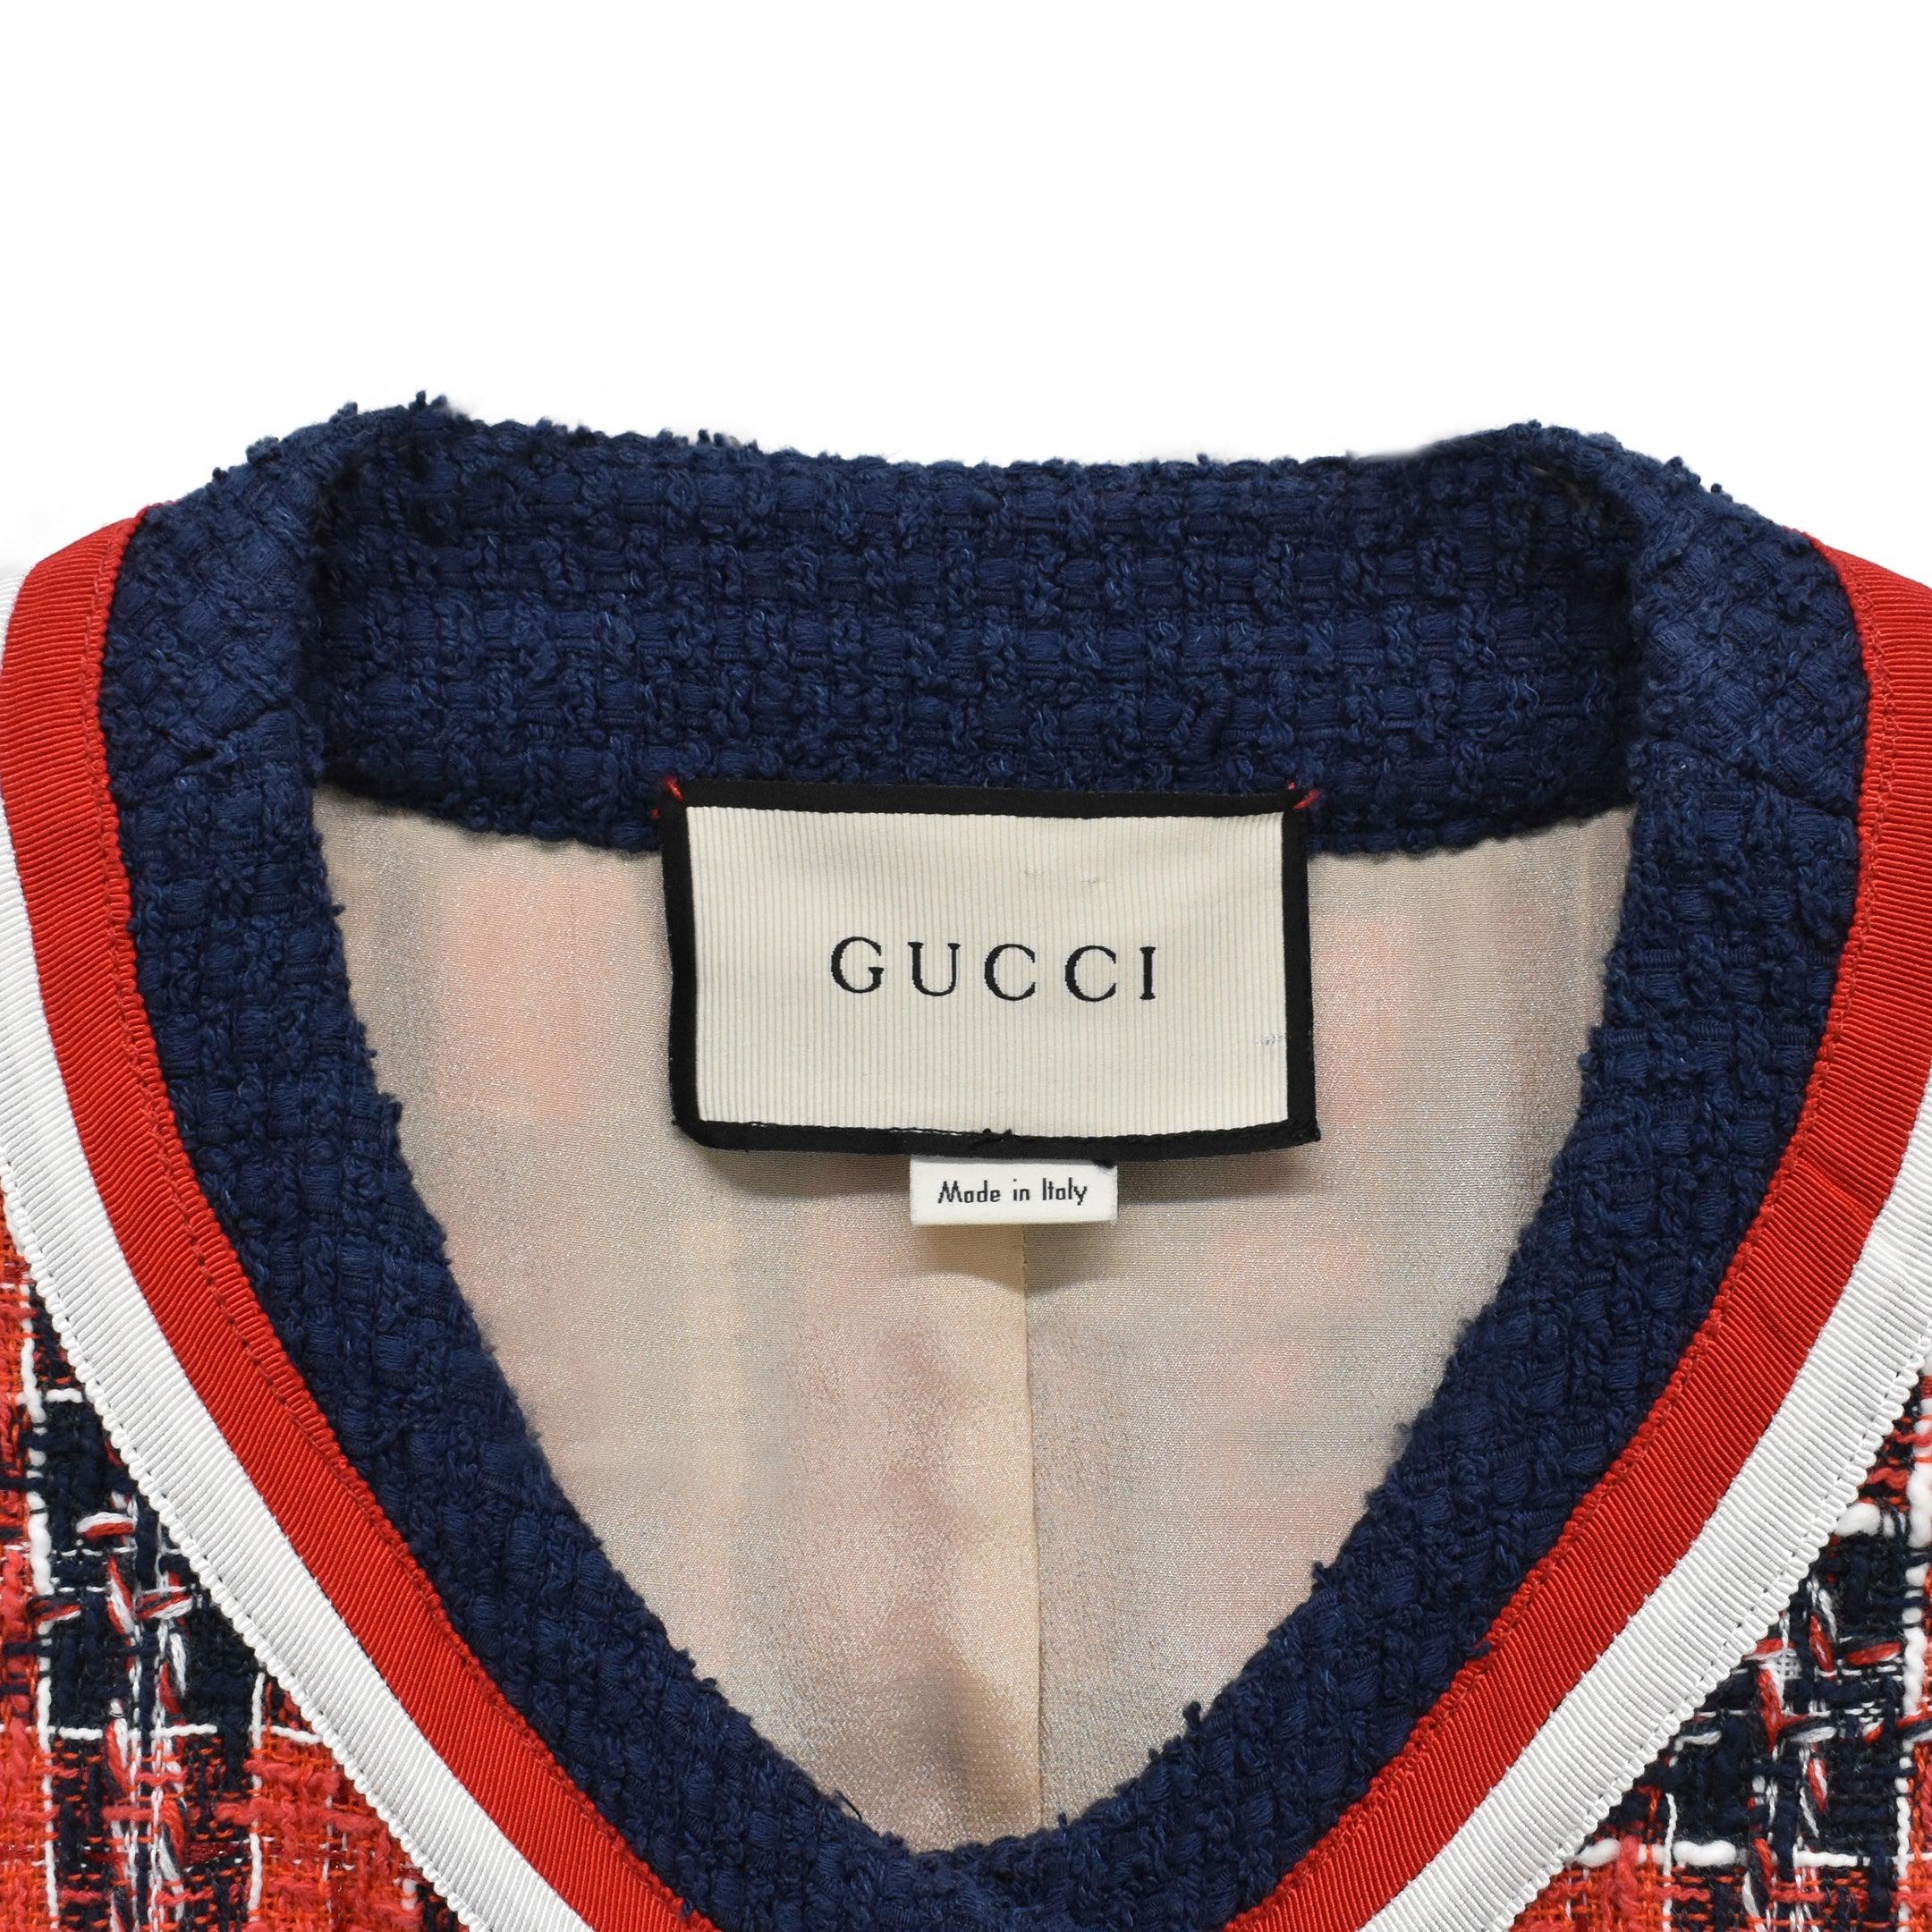 Gucci Tweed Jacket - Women's L - Fashionably Yours